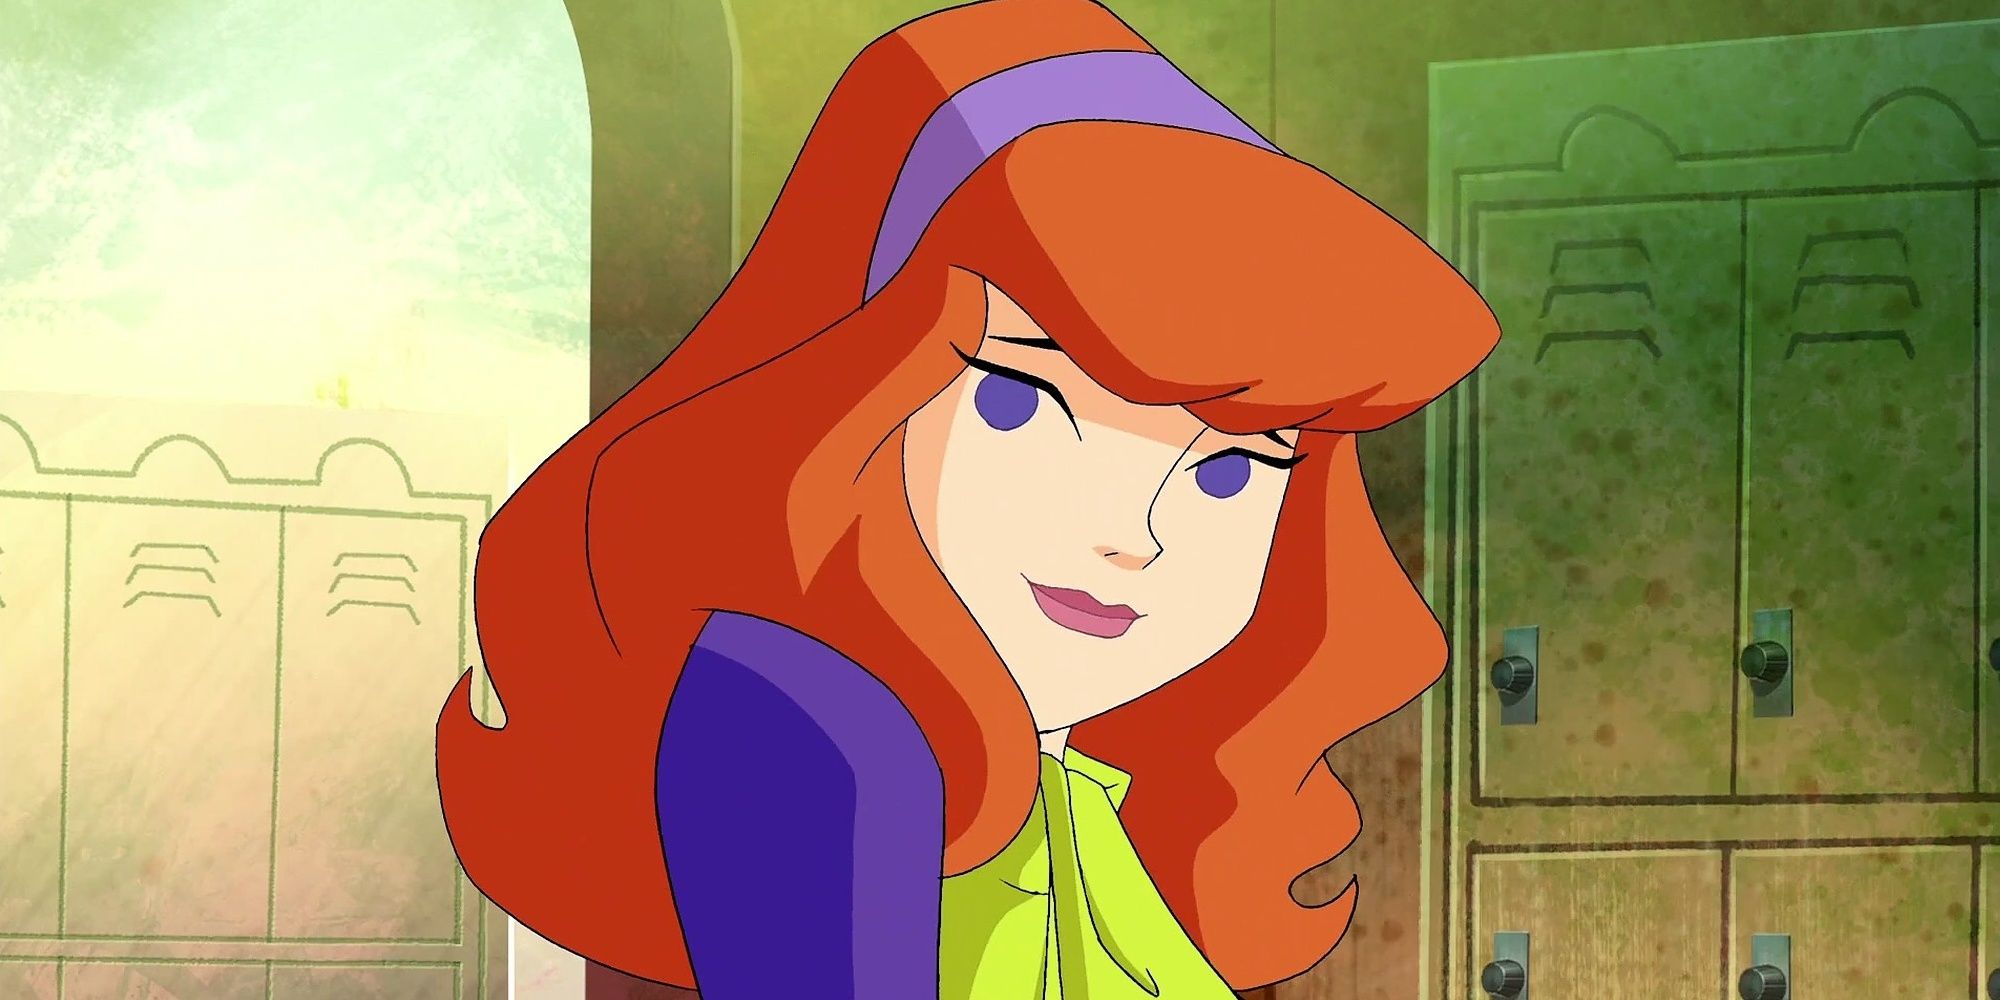 Daphne as she appears in Scooby-Doo post 2001